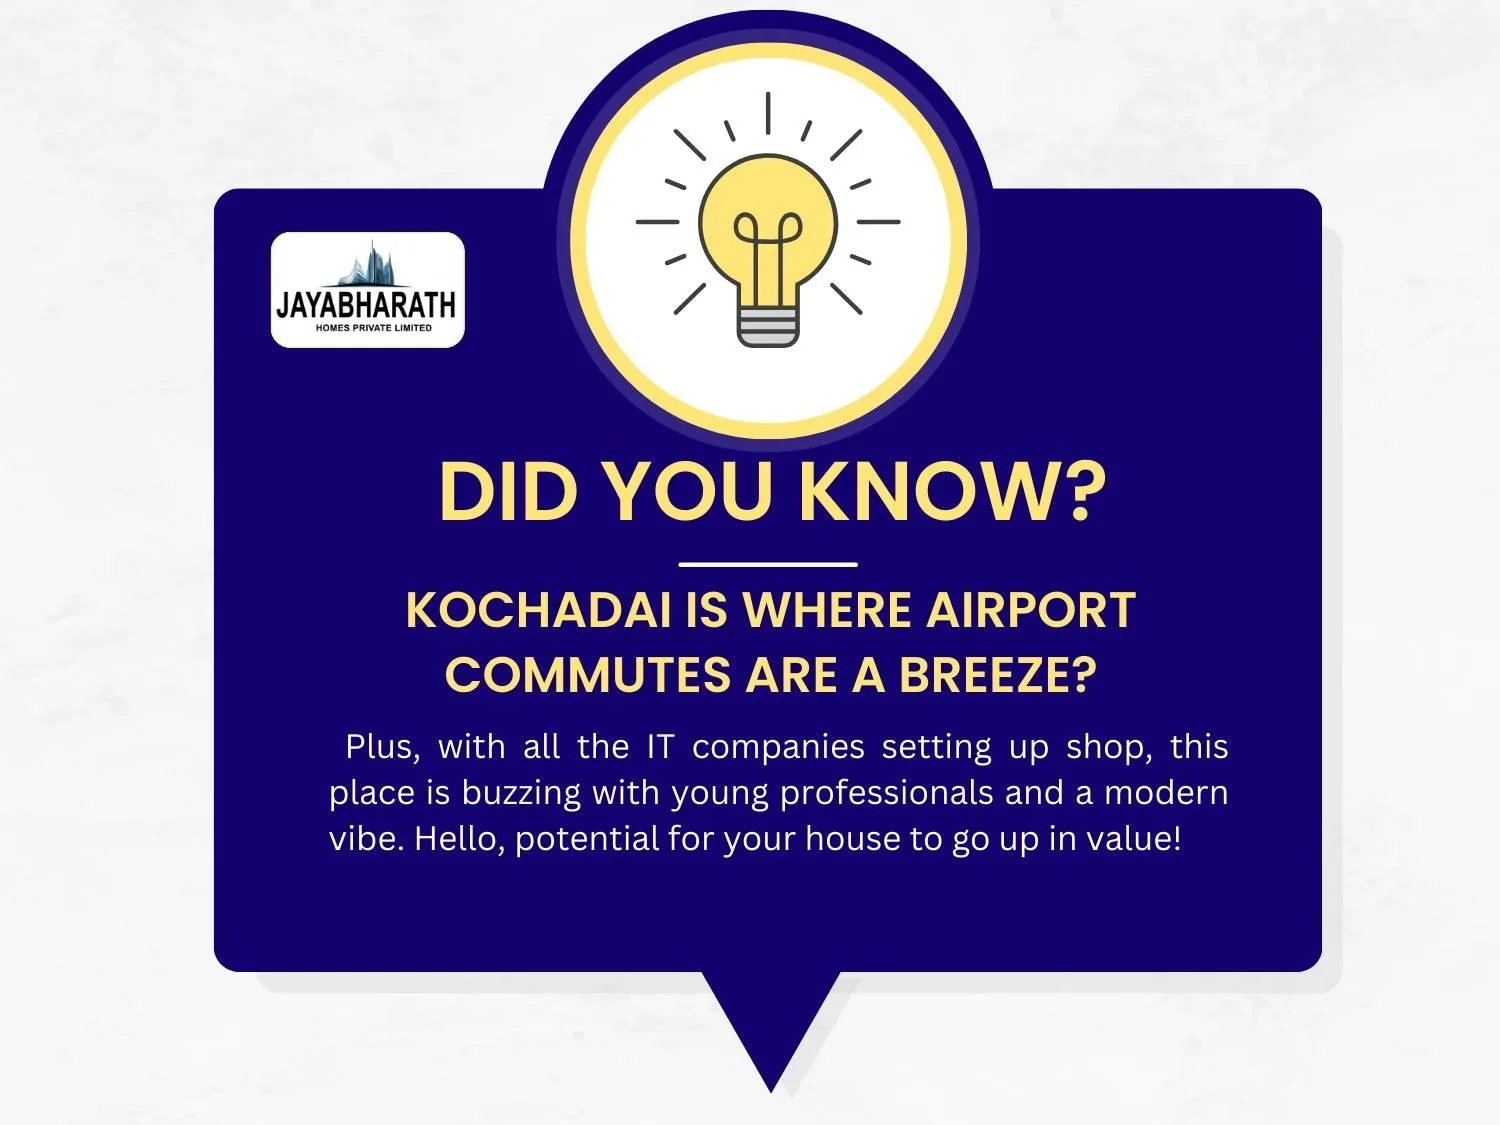 Kochadai is where airport commutes are a breeze?